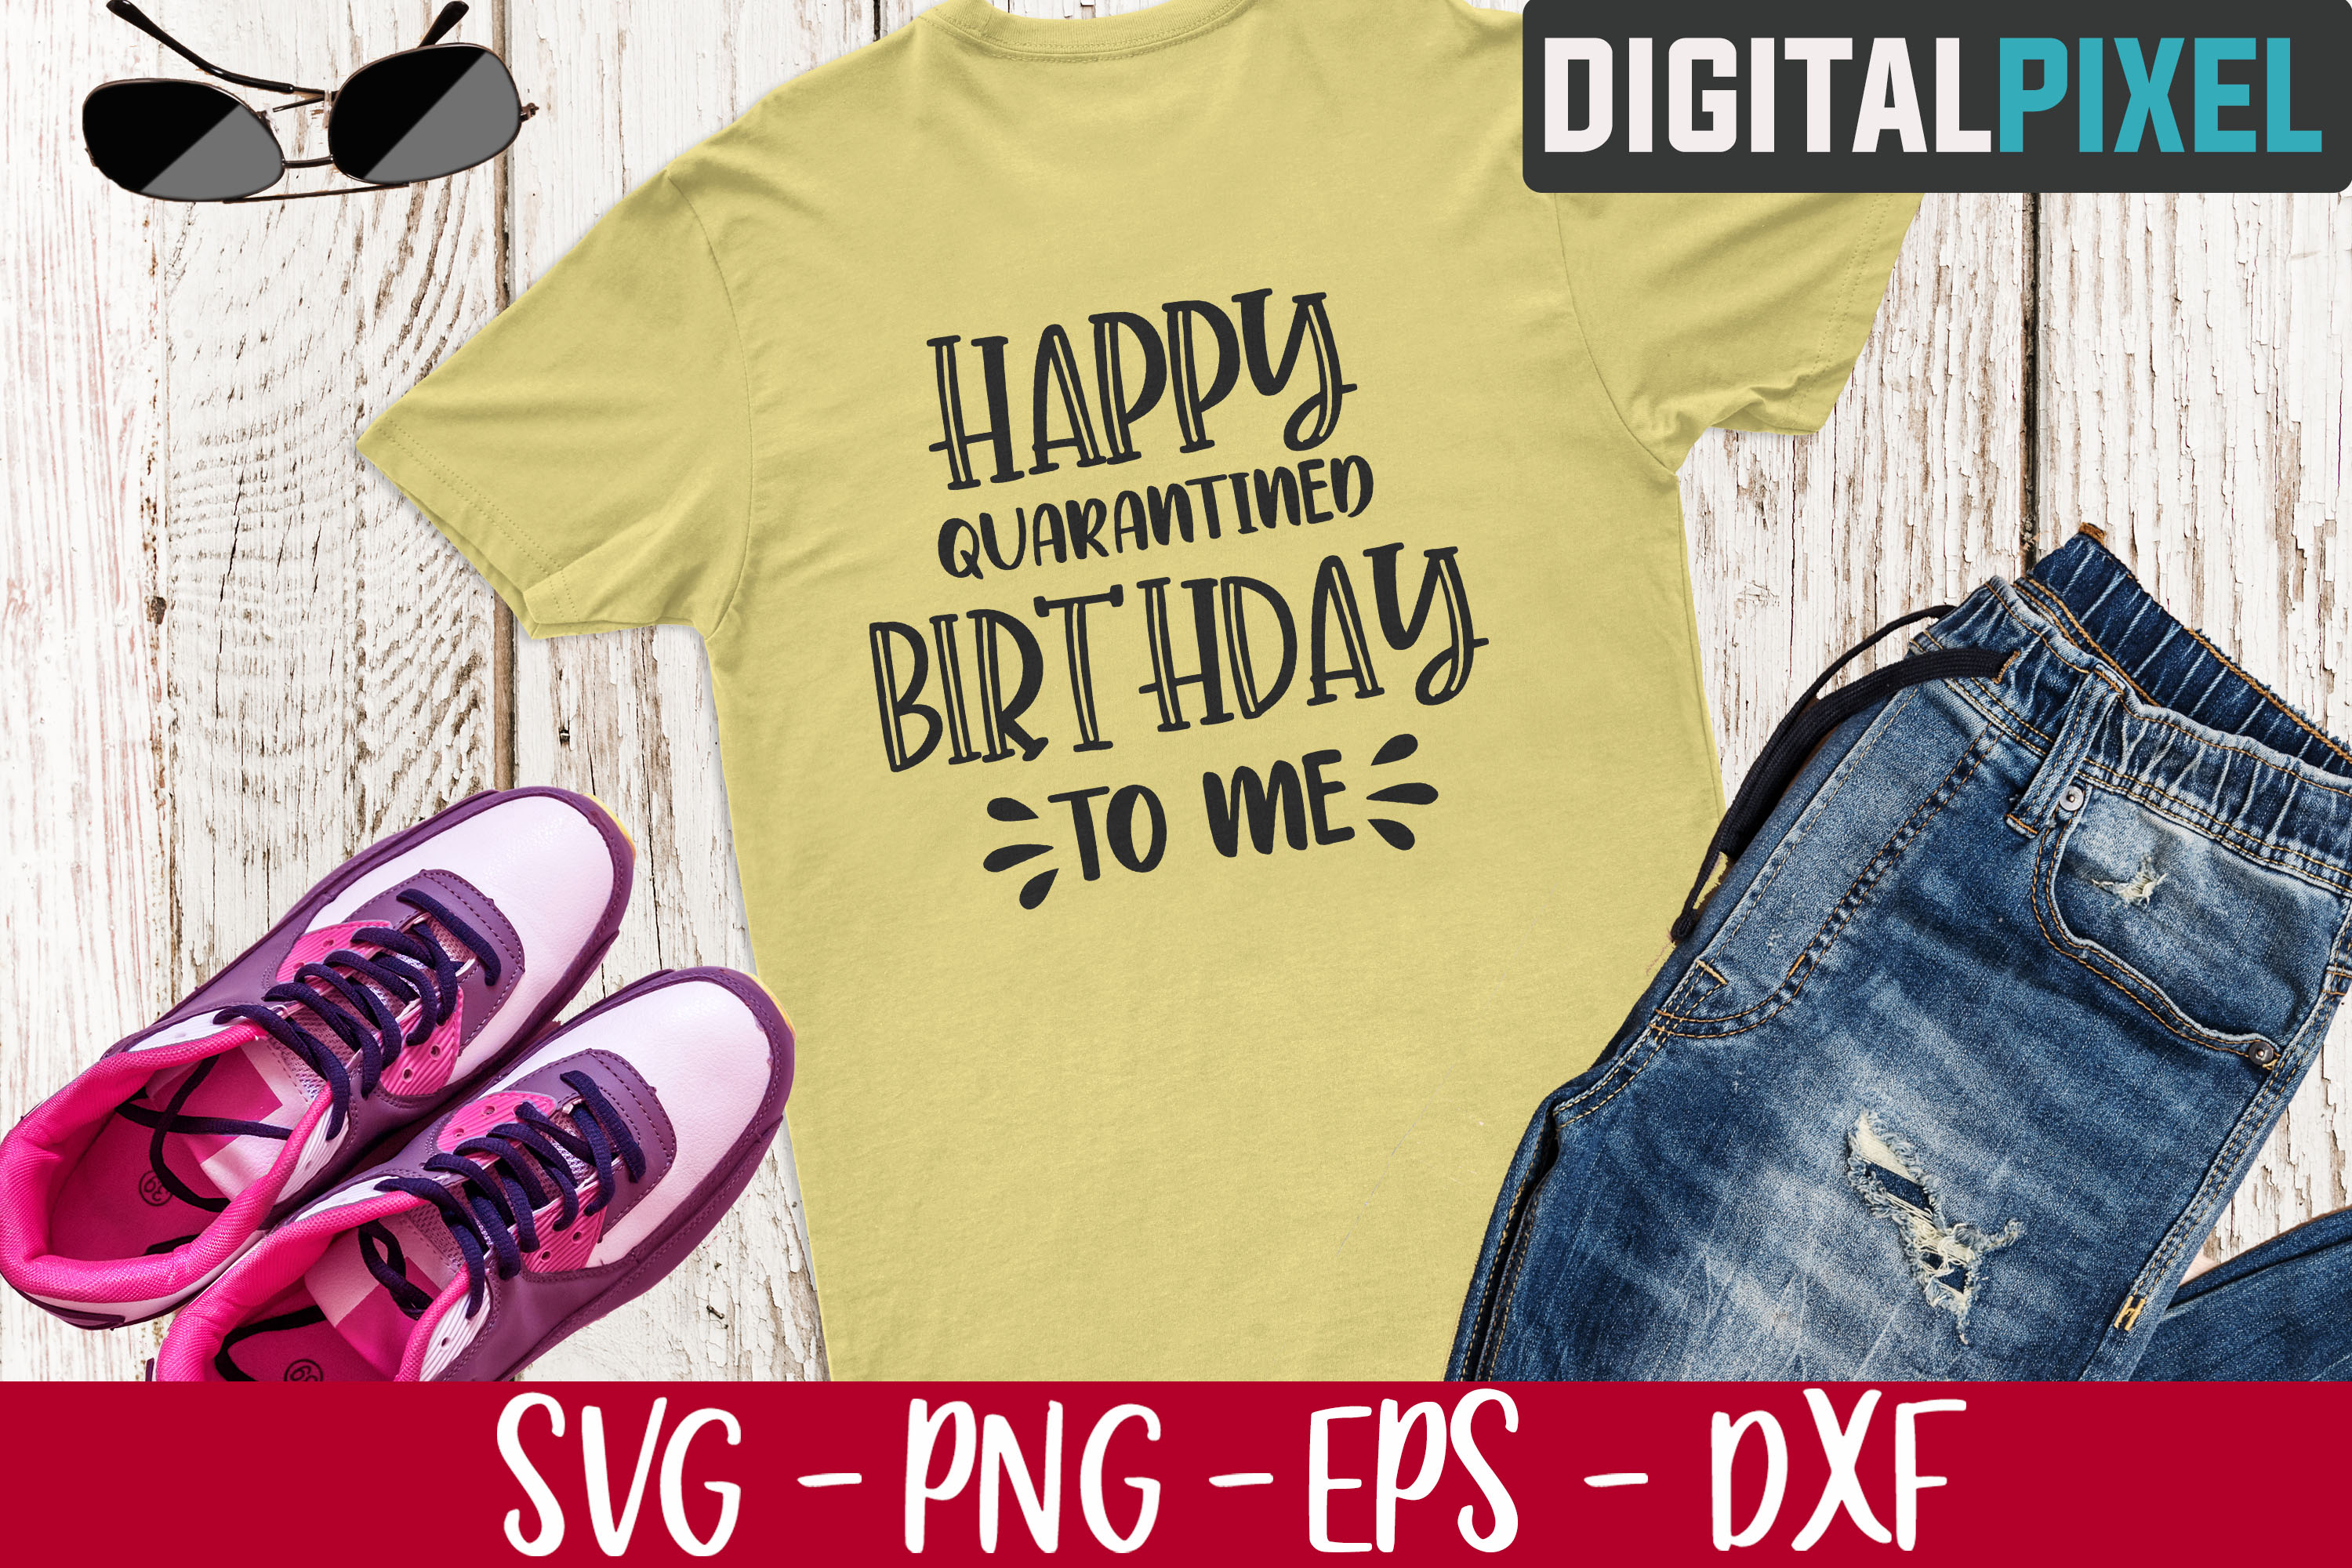 Download Happy Quarantined Birthday To Me SVG PNG DXF - Cutting Files